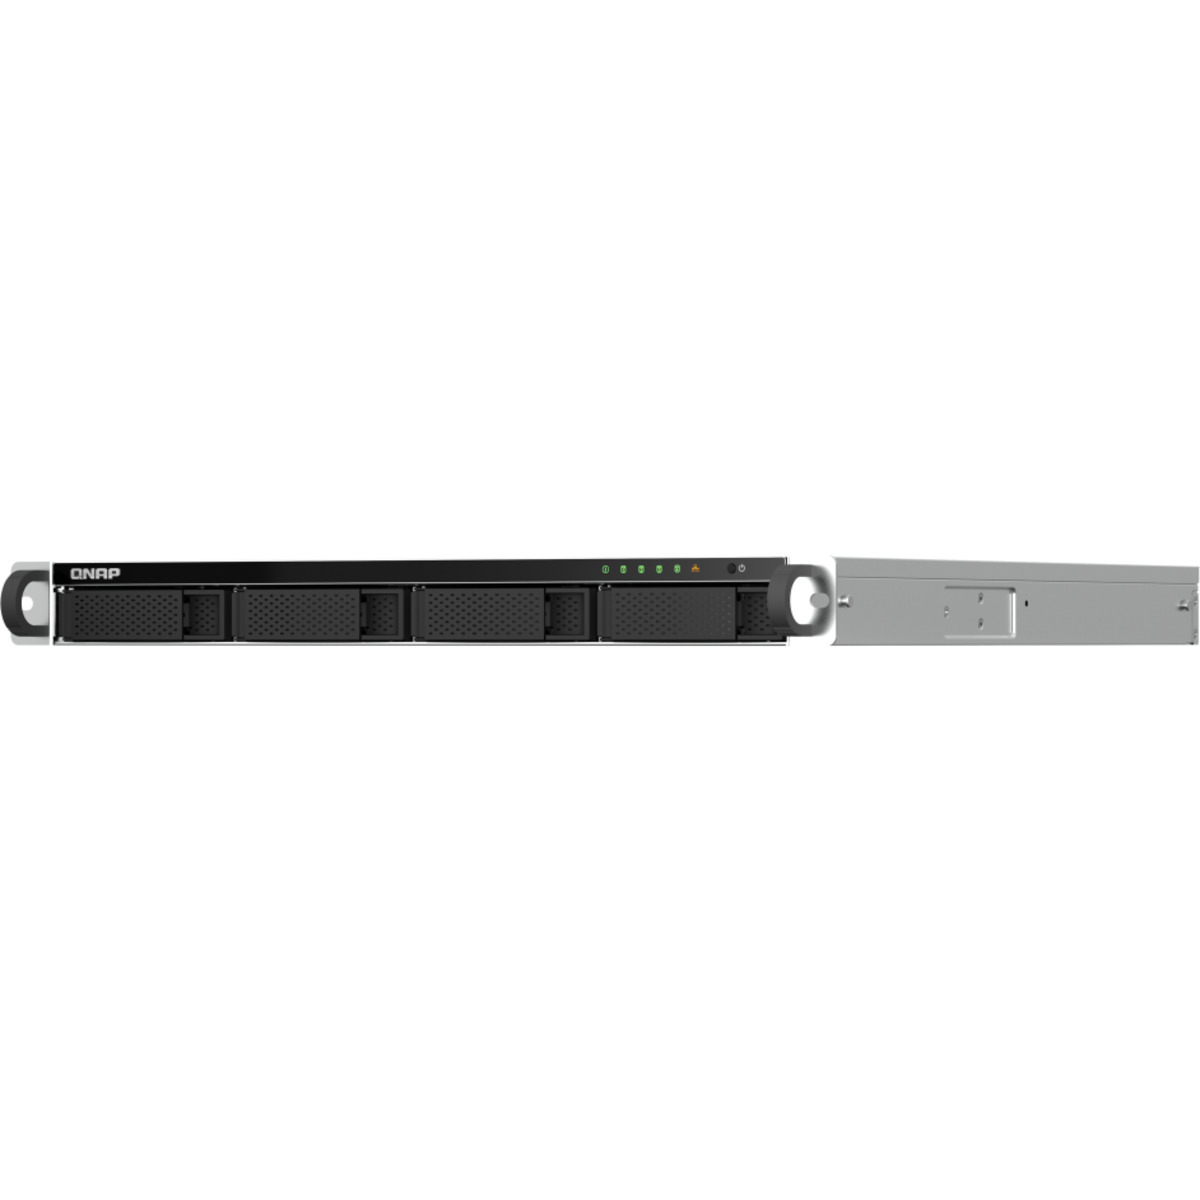 QNAP TS-464U RackMount 4-Bay Multimedia / Power User / Business NAS - Network Attached Storage Device Burn-In Tested Configurations TS-464U